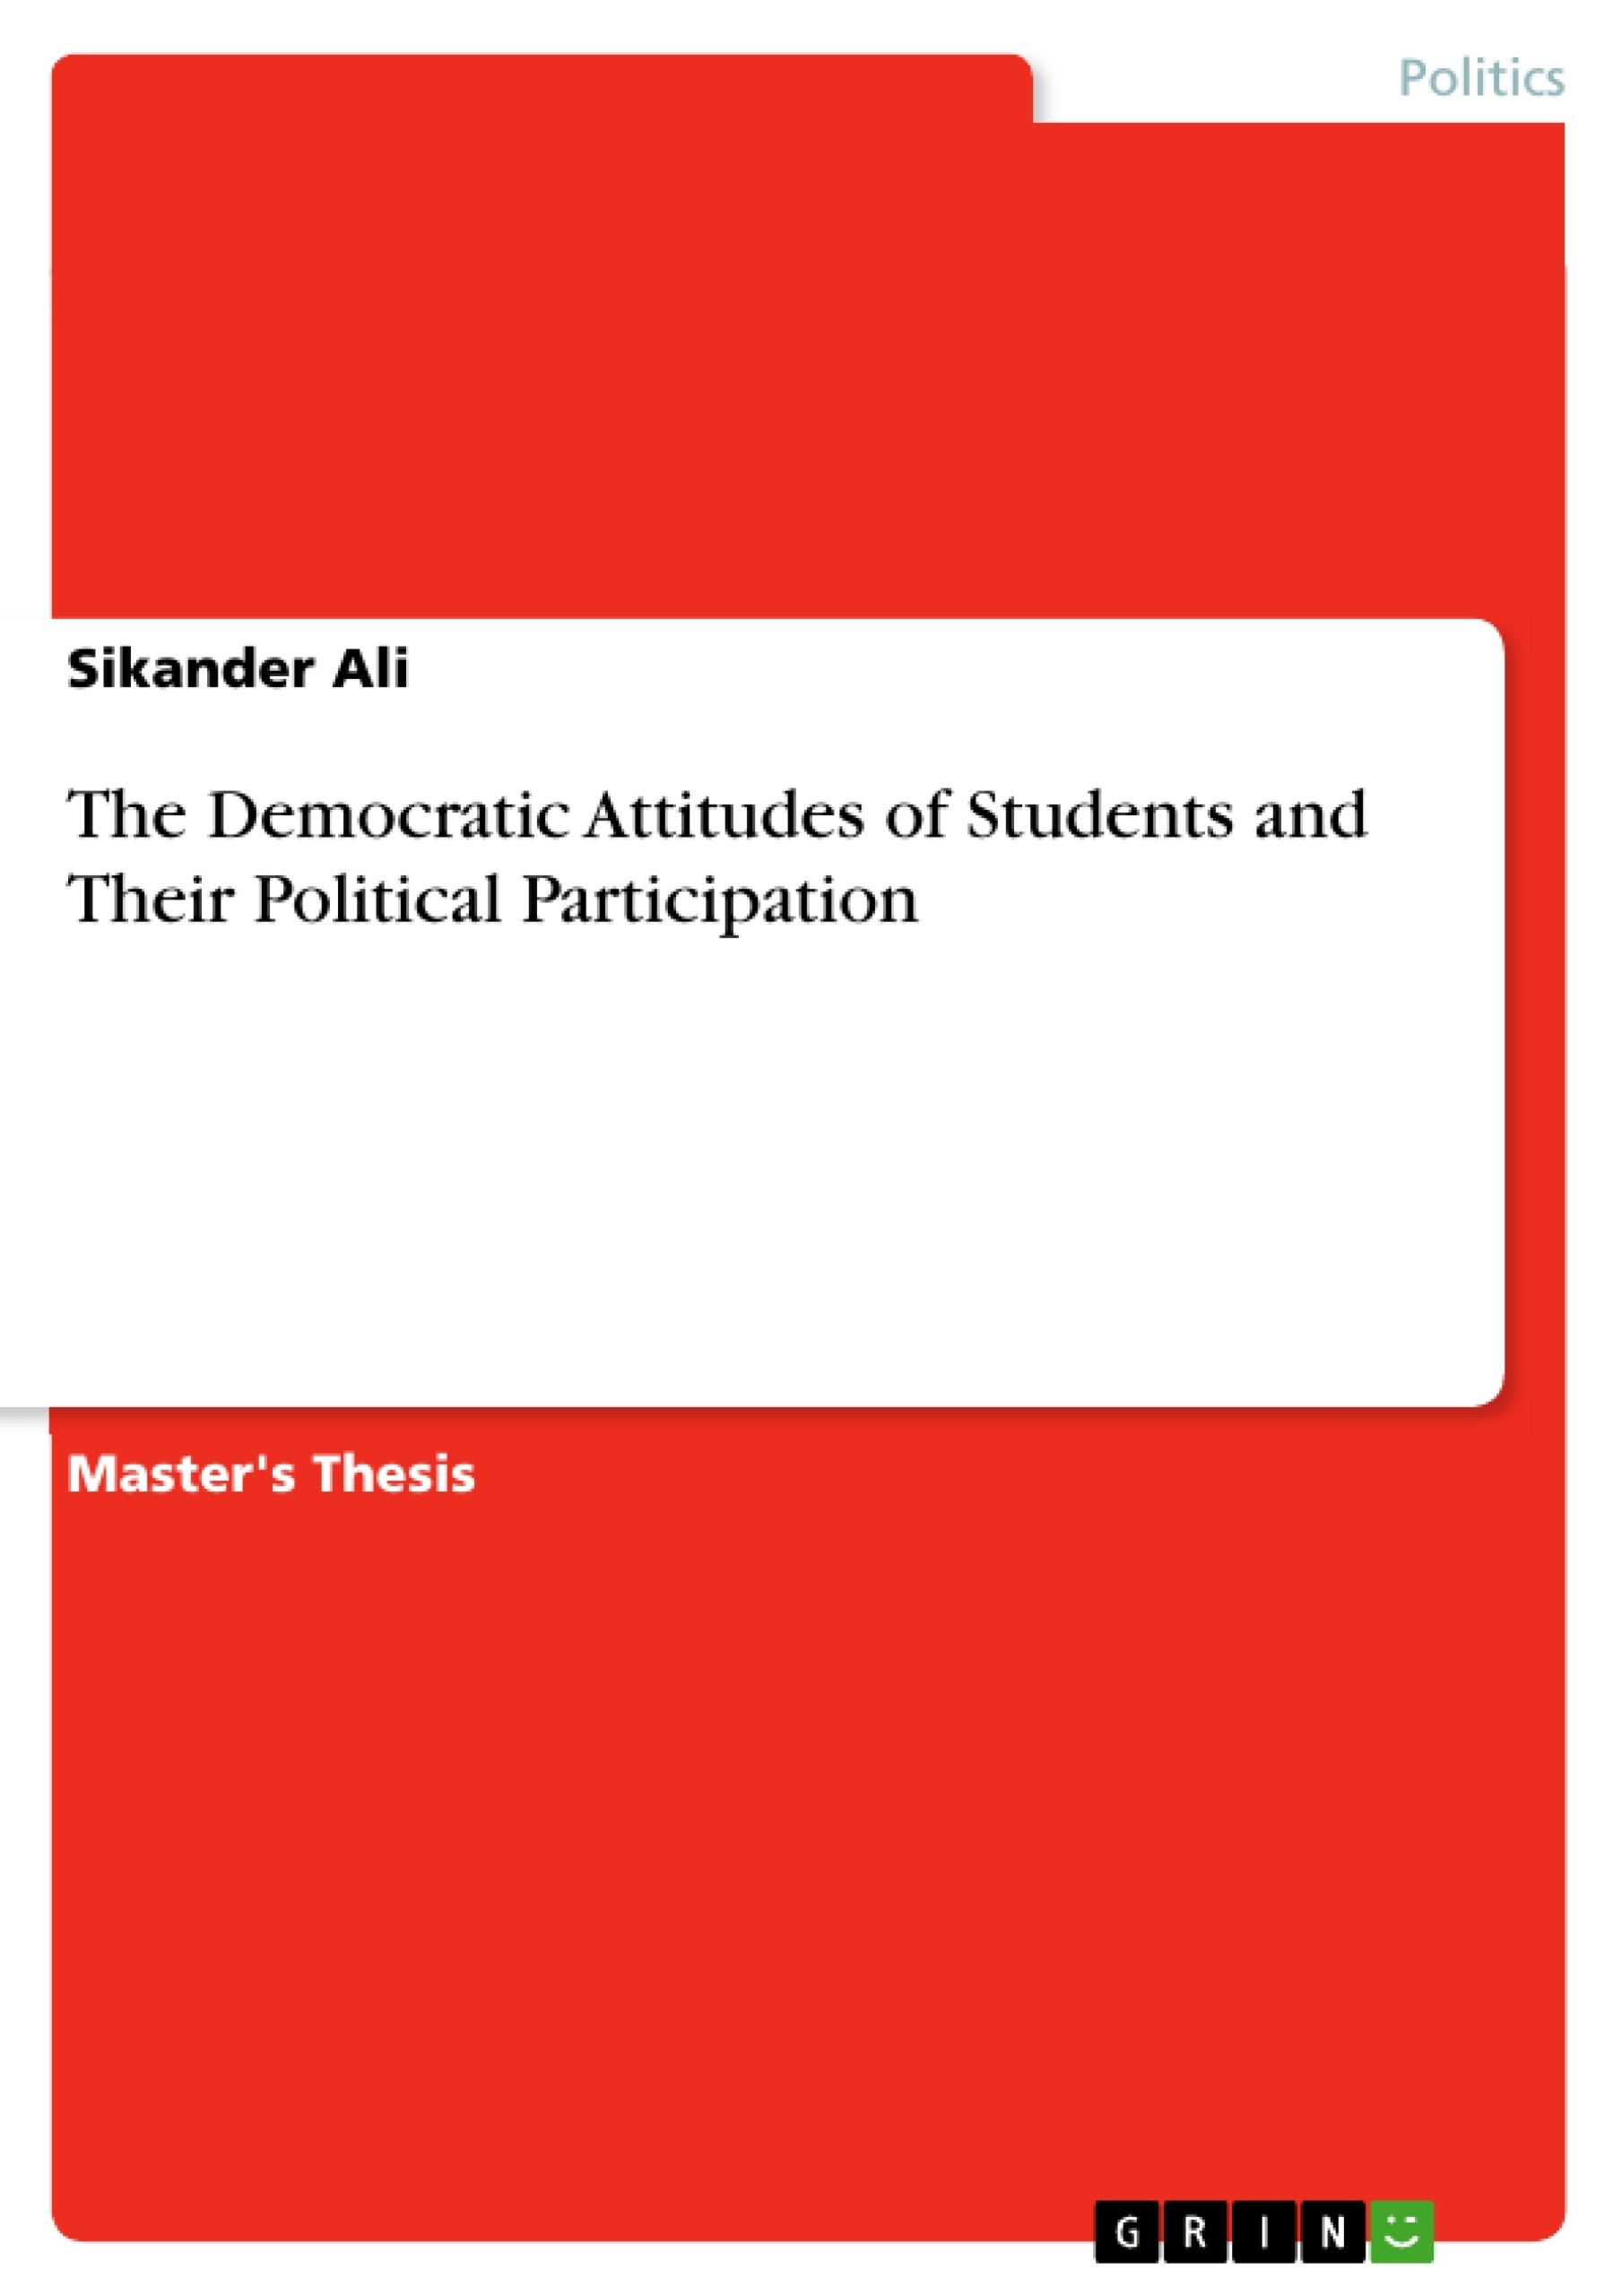 Title: The Democratic Attitudes of Students and Their Political Participation